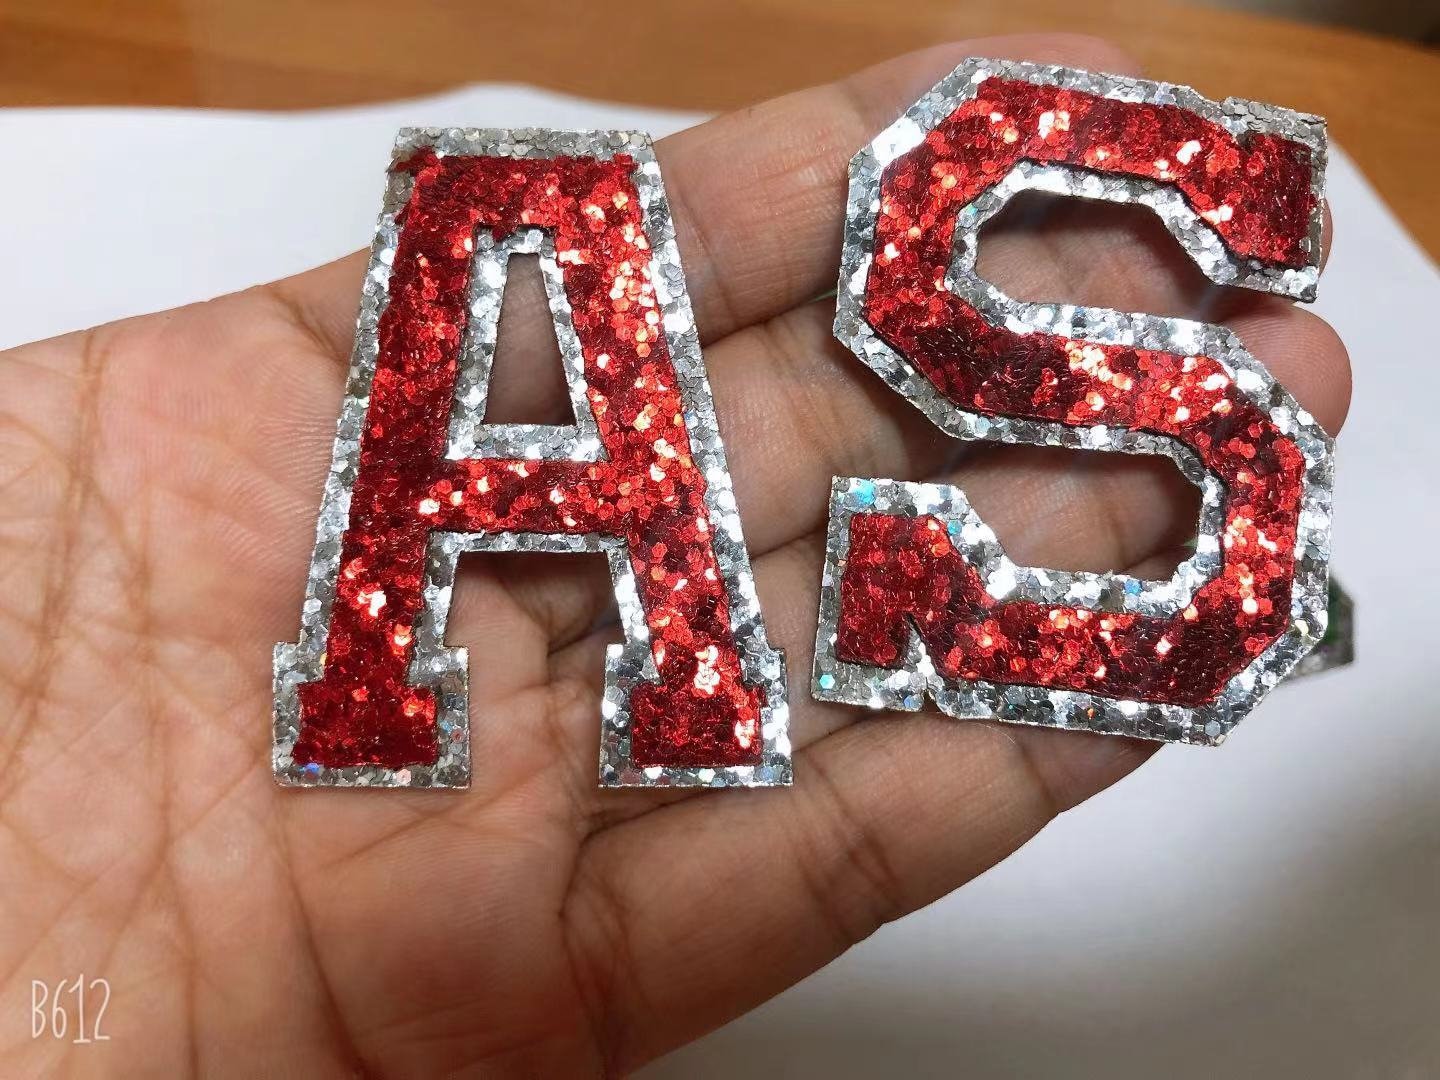 56pcs Love Design Letter Glitter Iron On Patches Bag A-Z DIY Craft